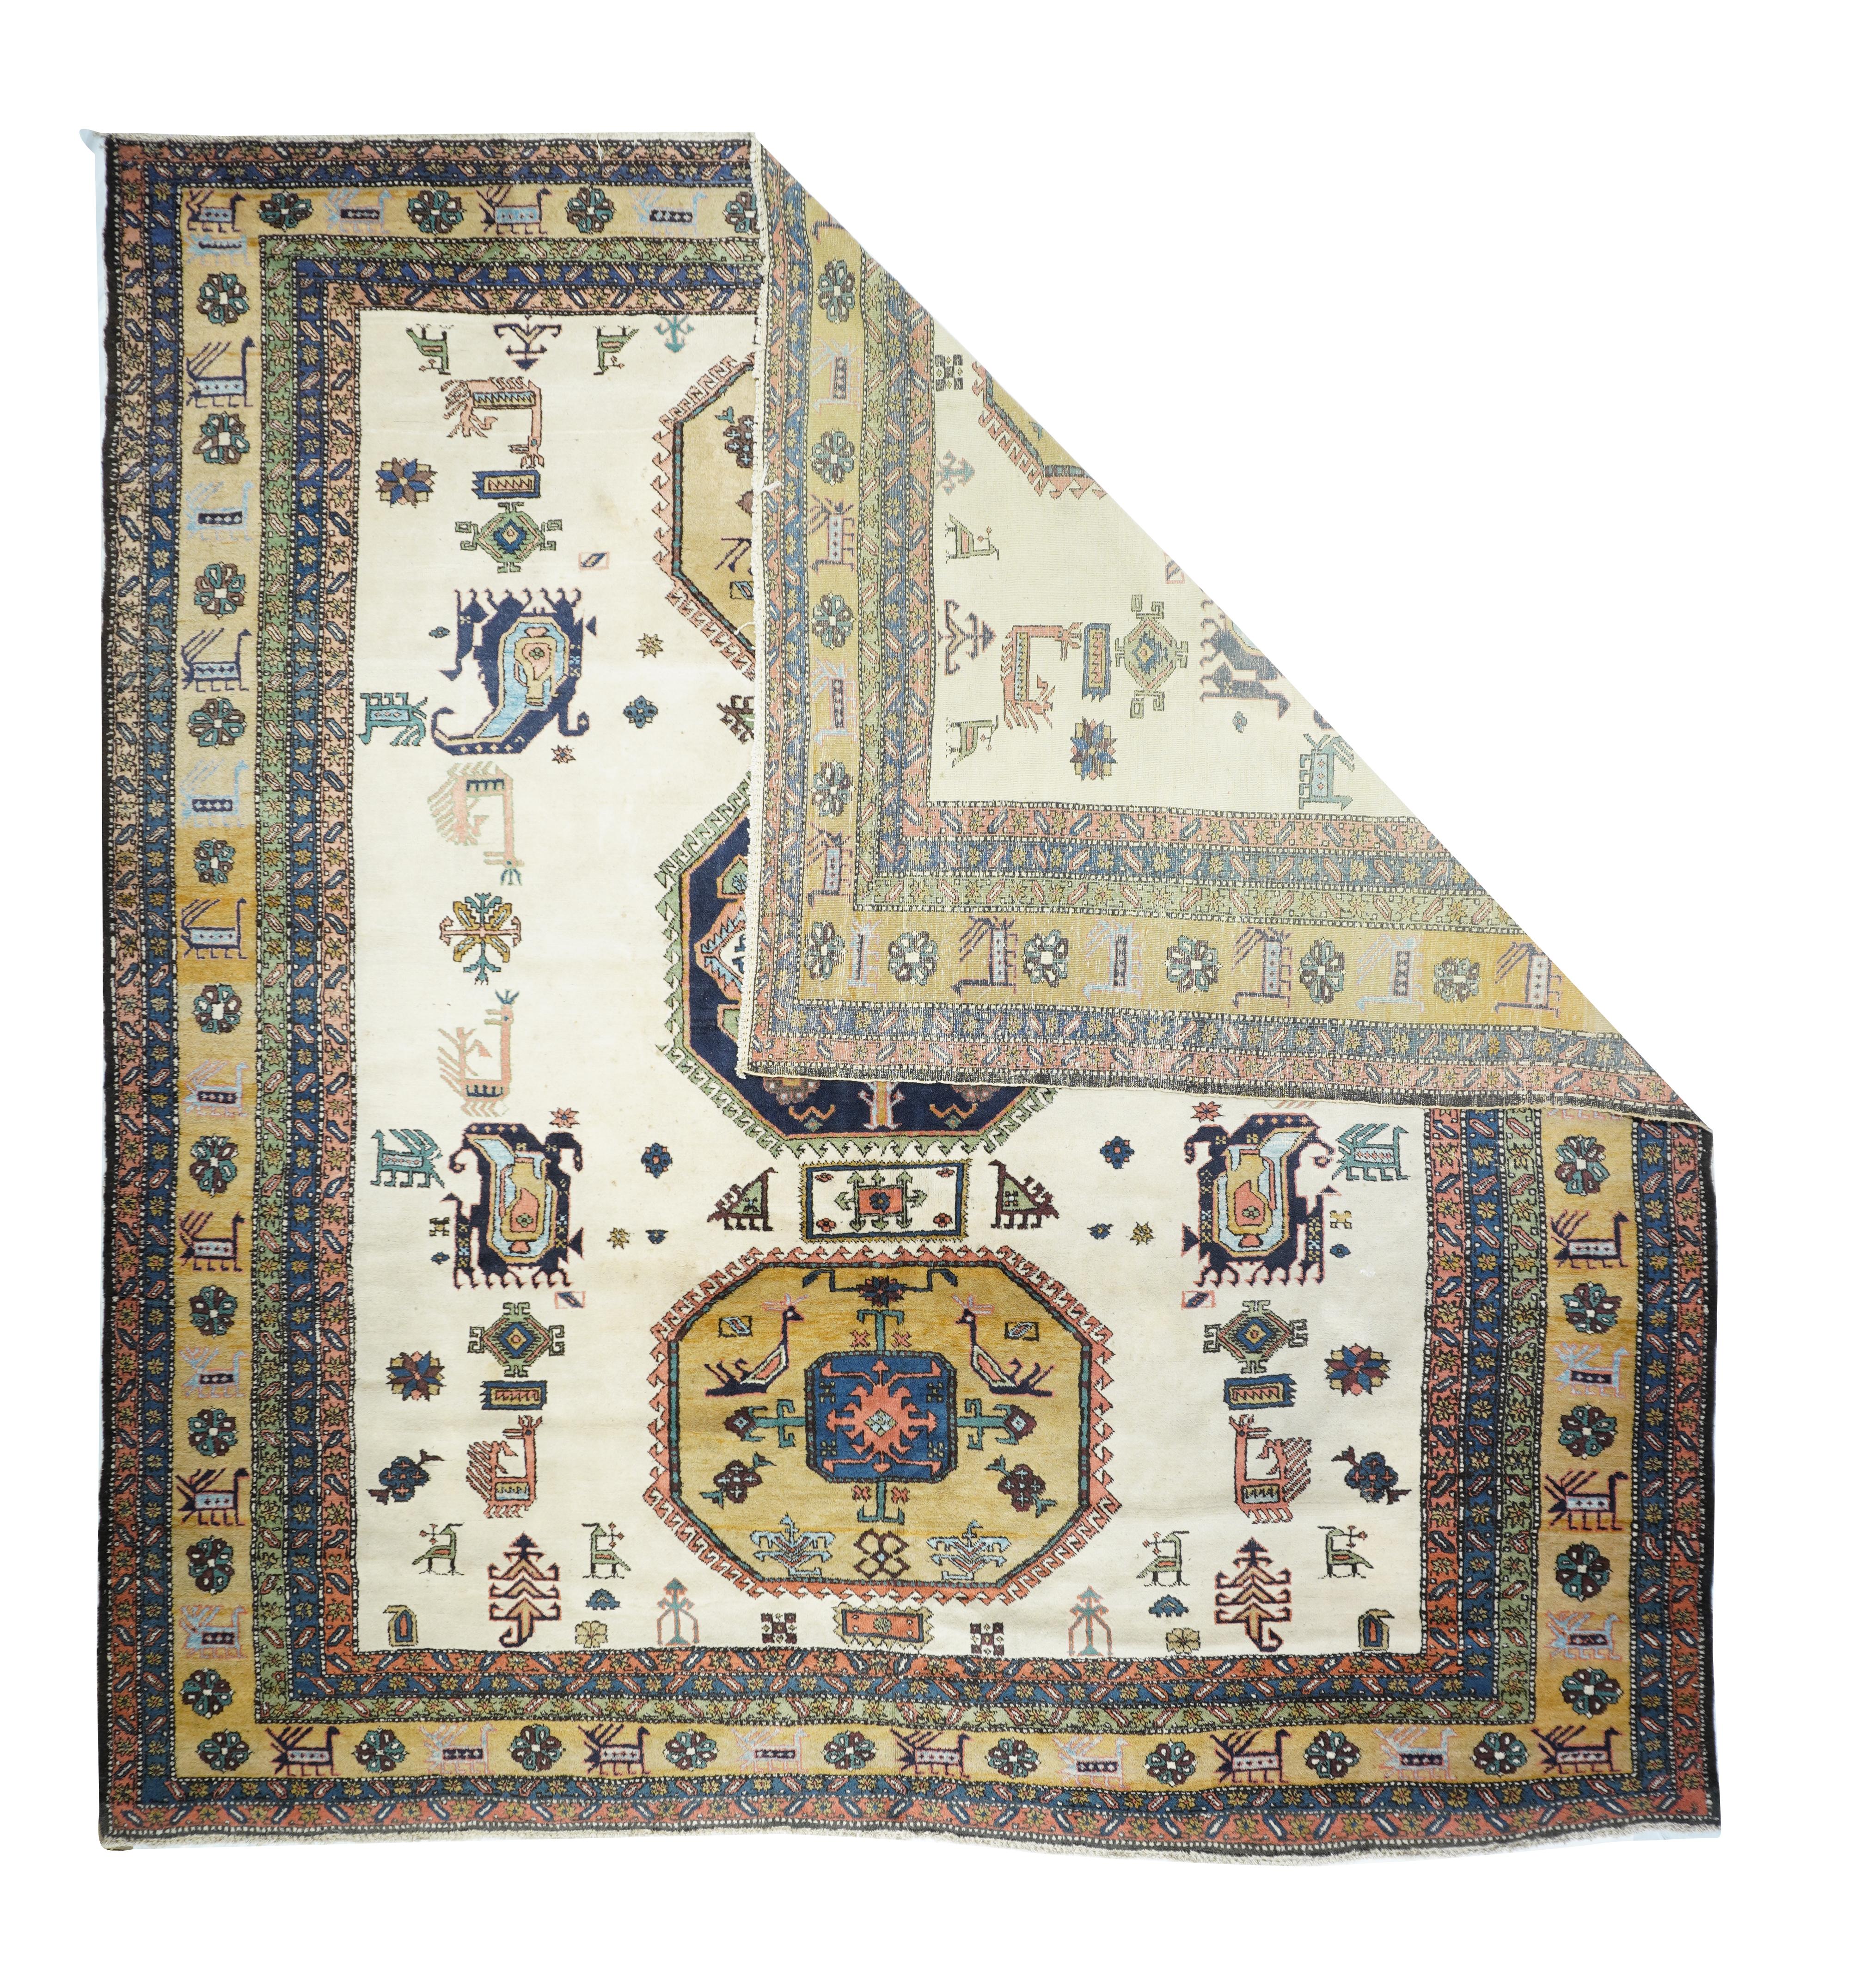 In a post-WWII Caucasian style, with three octagonal medallions dark slate blue and rusty goldenrod, with internal bird and octagon décor, on a sandy grounds, with boteh and rooster secondary forms. Straw border with animal and rosettes. Cotton